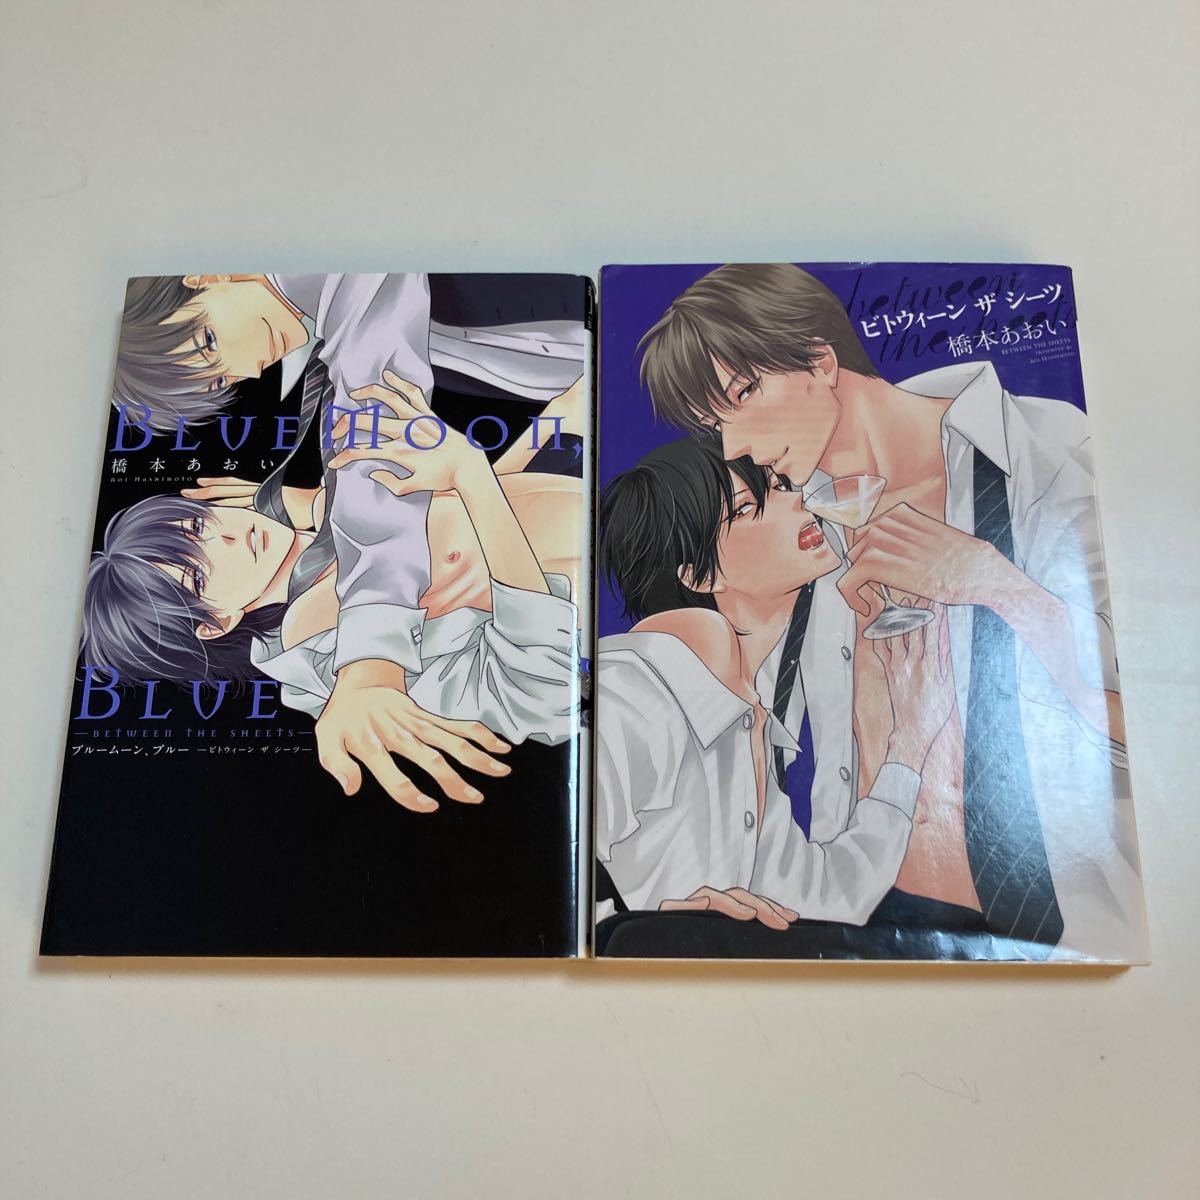 between the sheets BlueMoon,Blue 橋本あおい　2冊セット